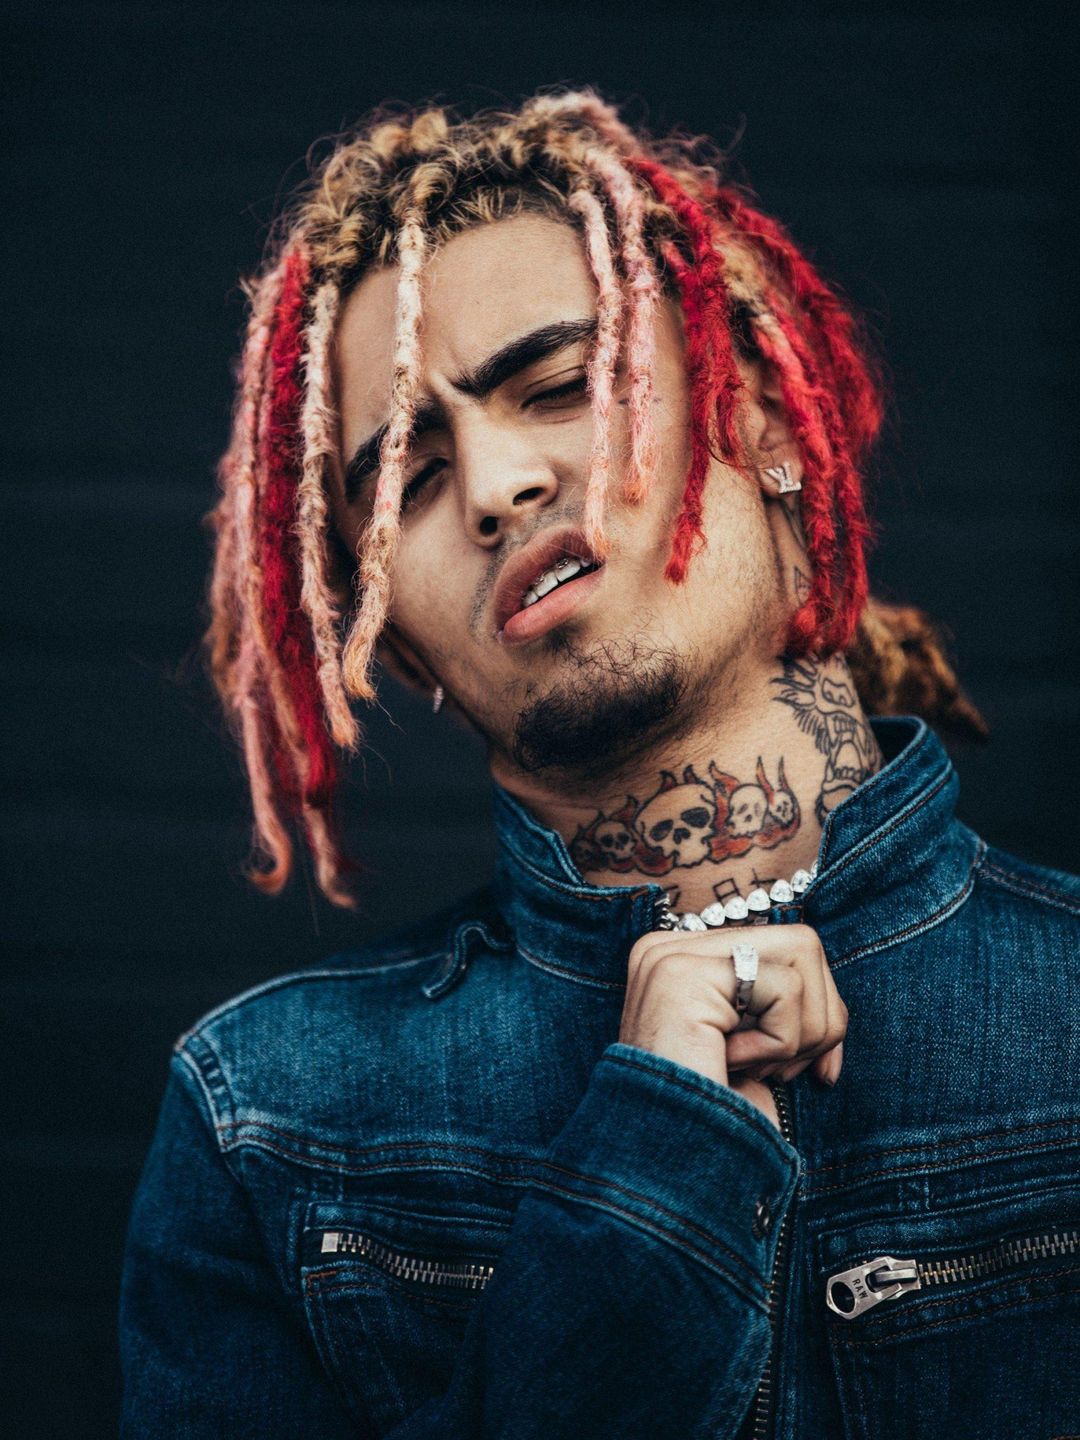 Lil Pump how old is he